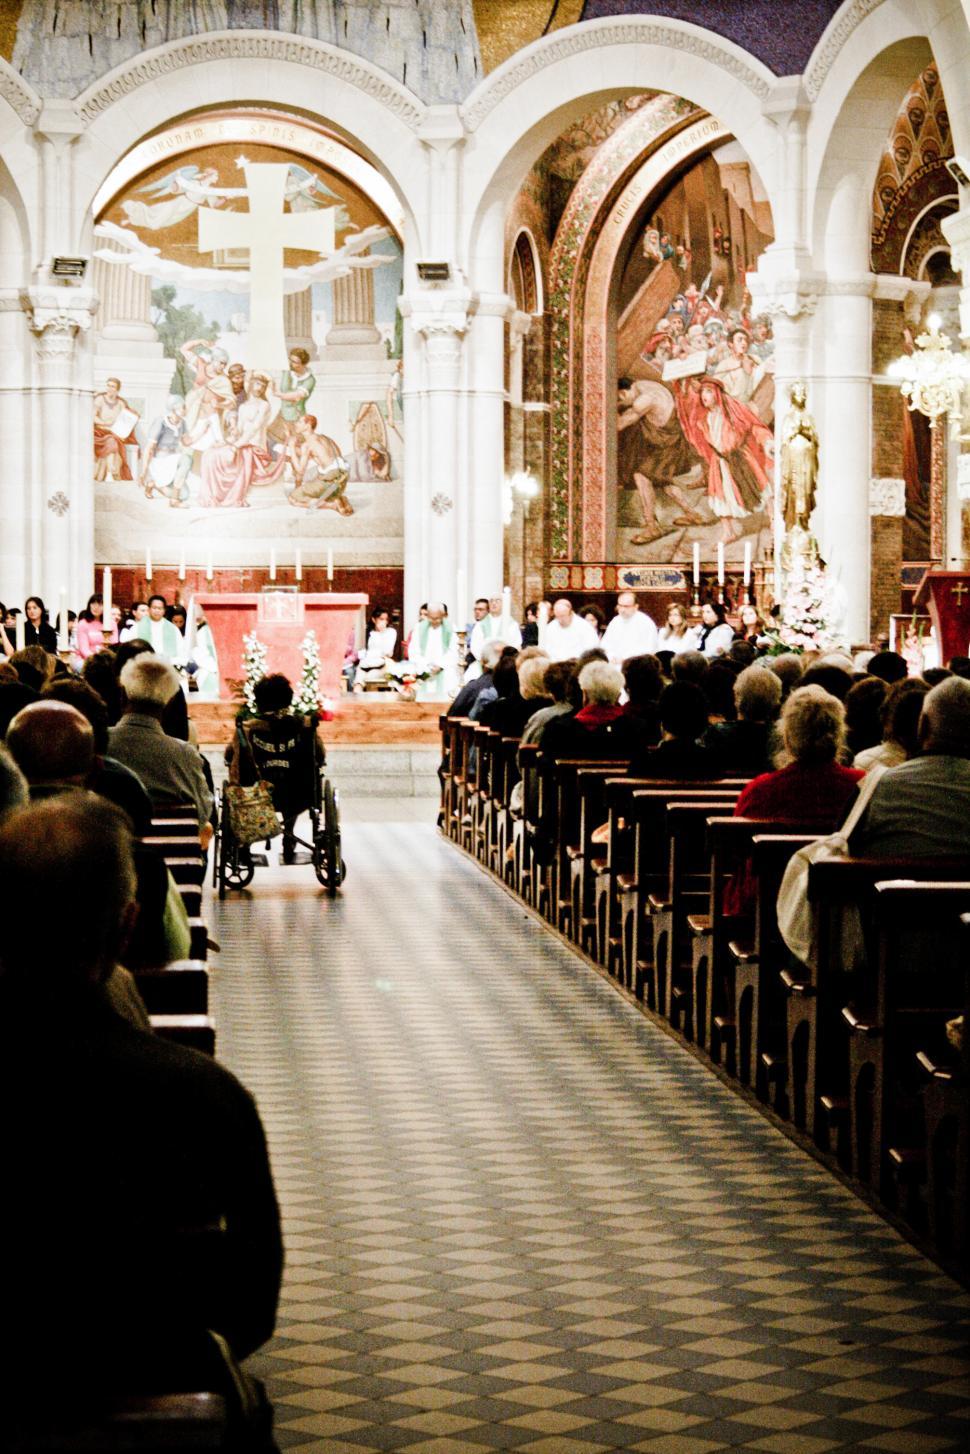 Free Image of Inside a church service 